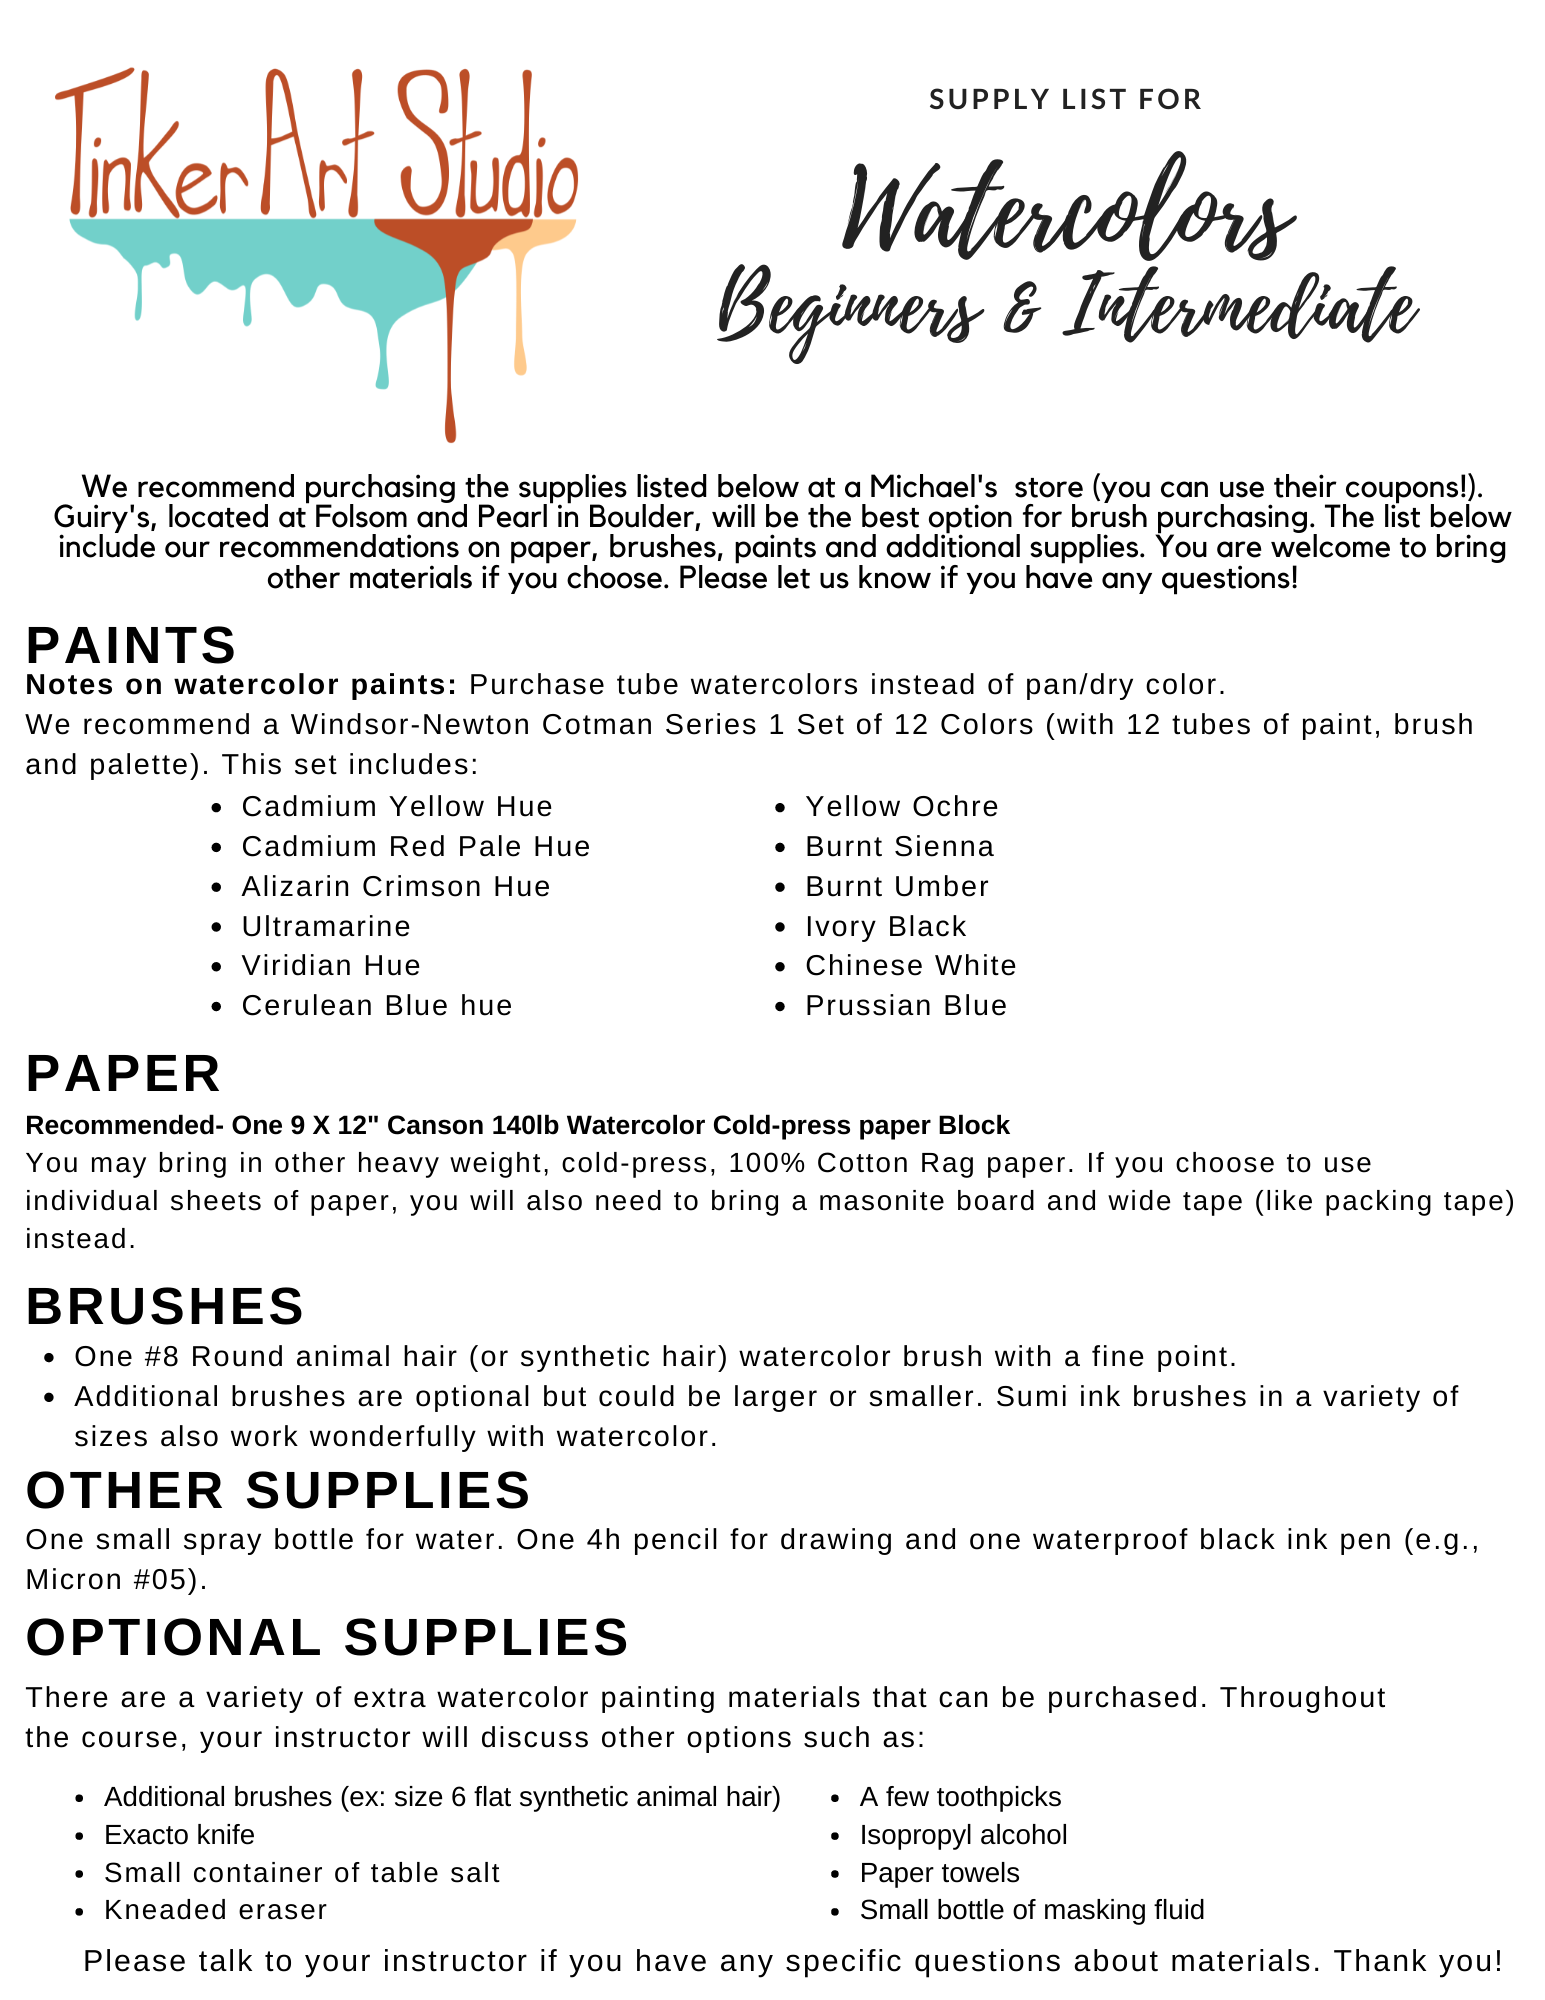 Suggested Art Supply List for Classes - Art Works! Studio